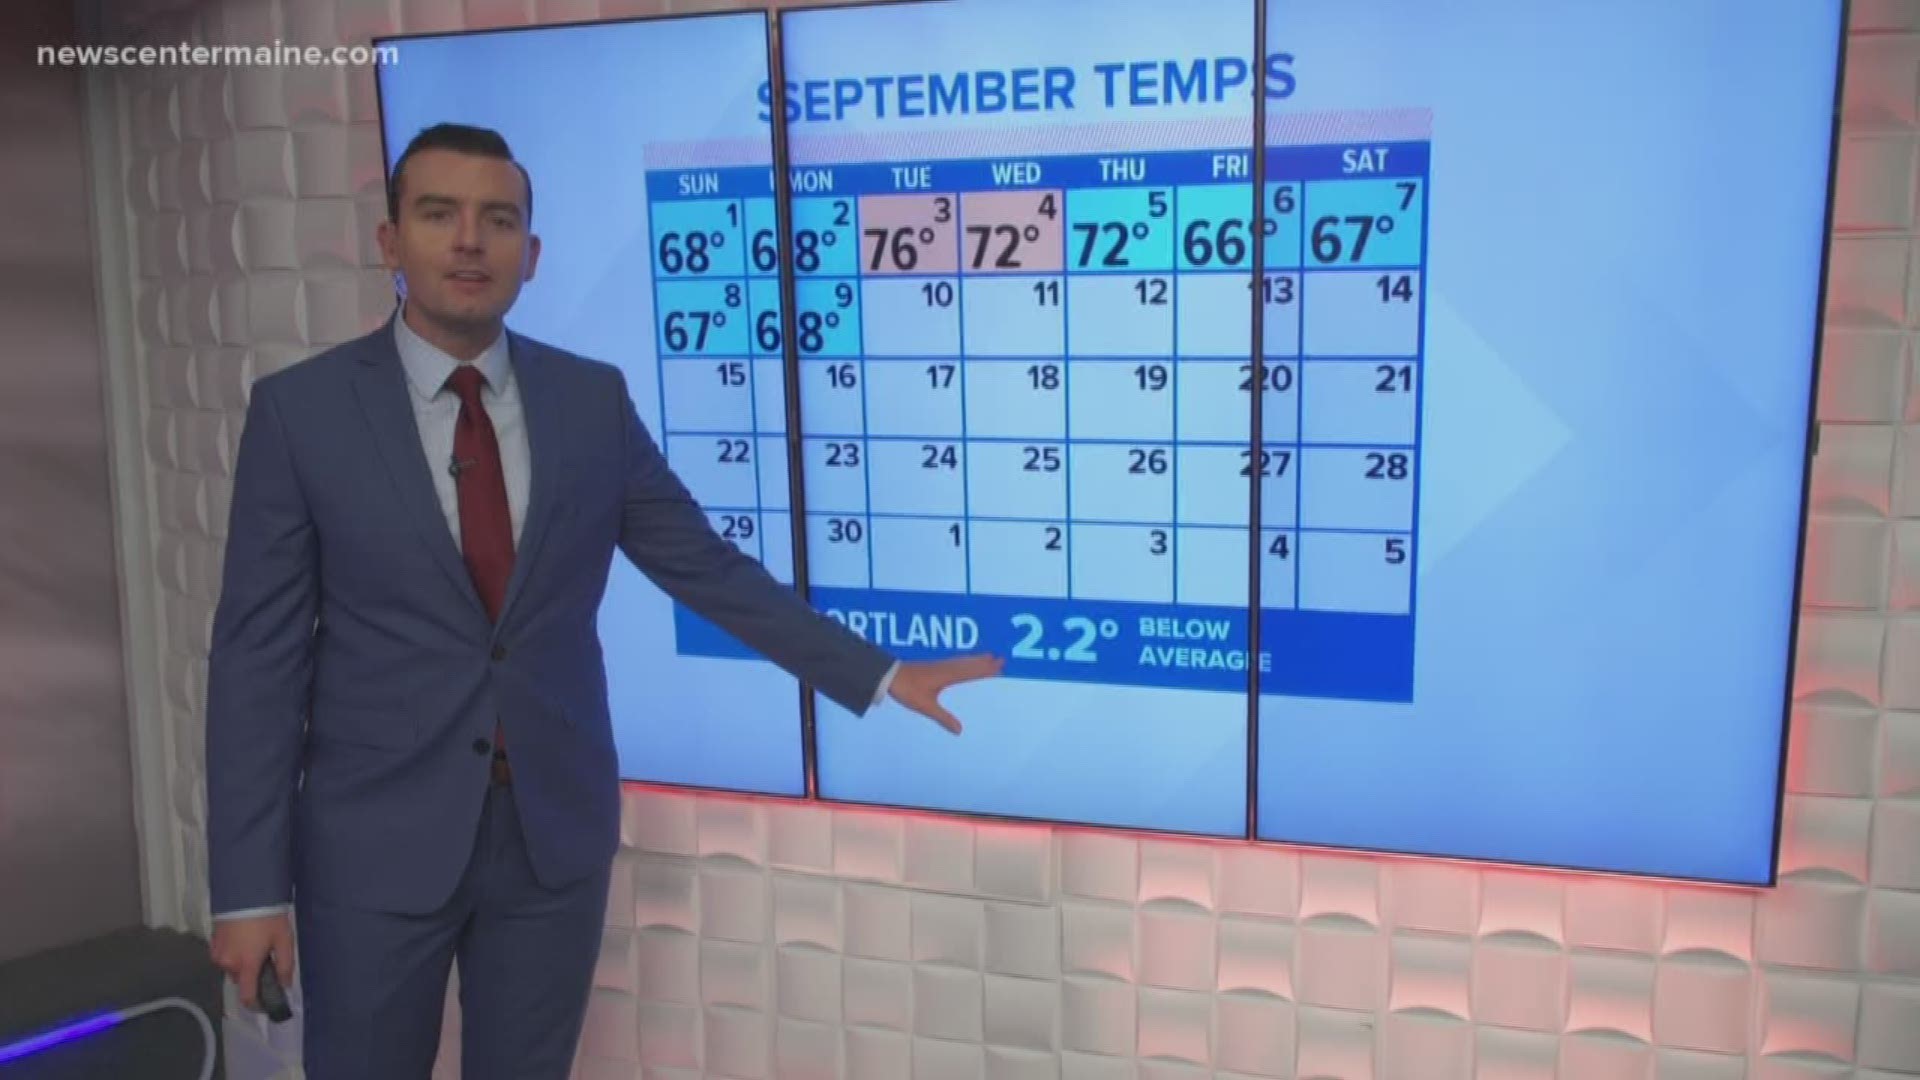 Meteorologist Ryan Breton says don't put the beach chairs away just yet. Warmer weather is headed our way very soon.